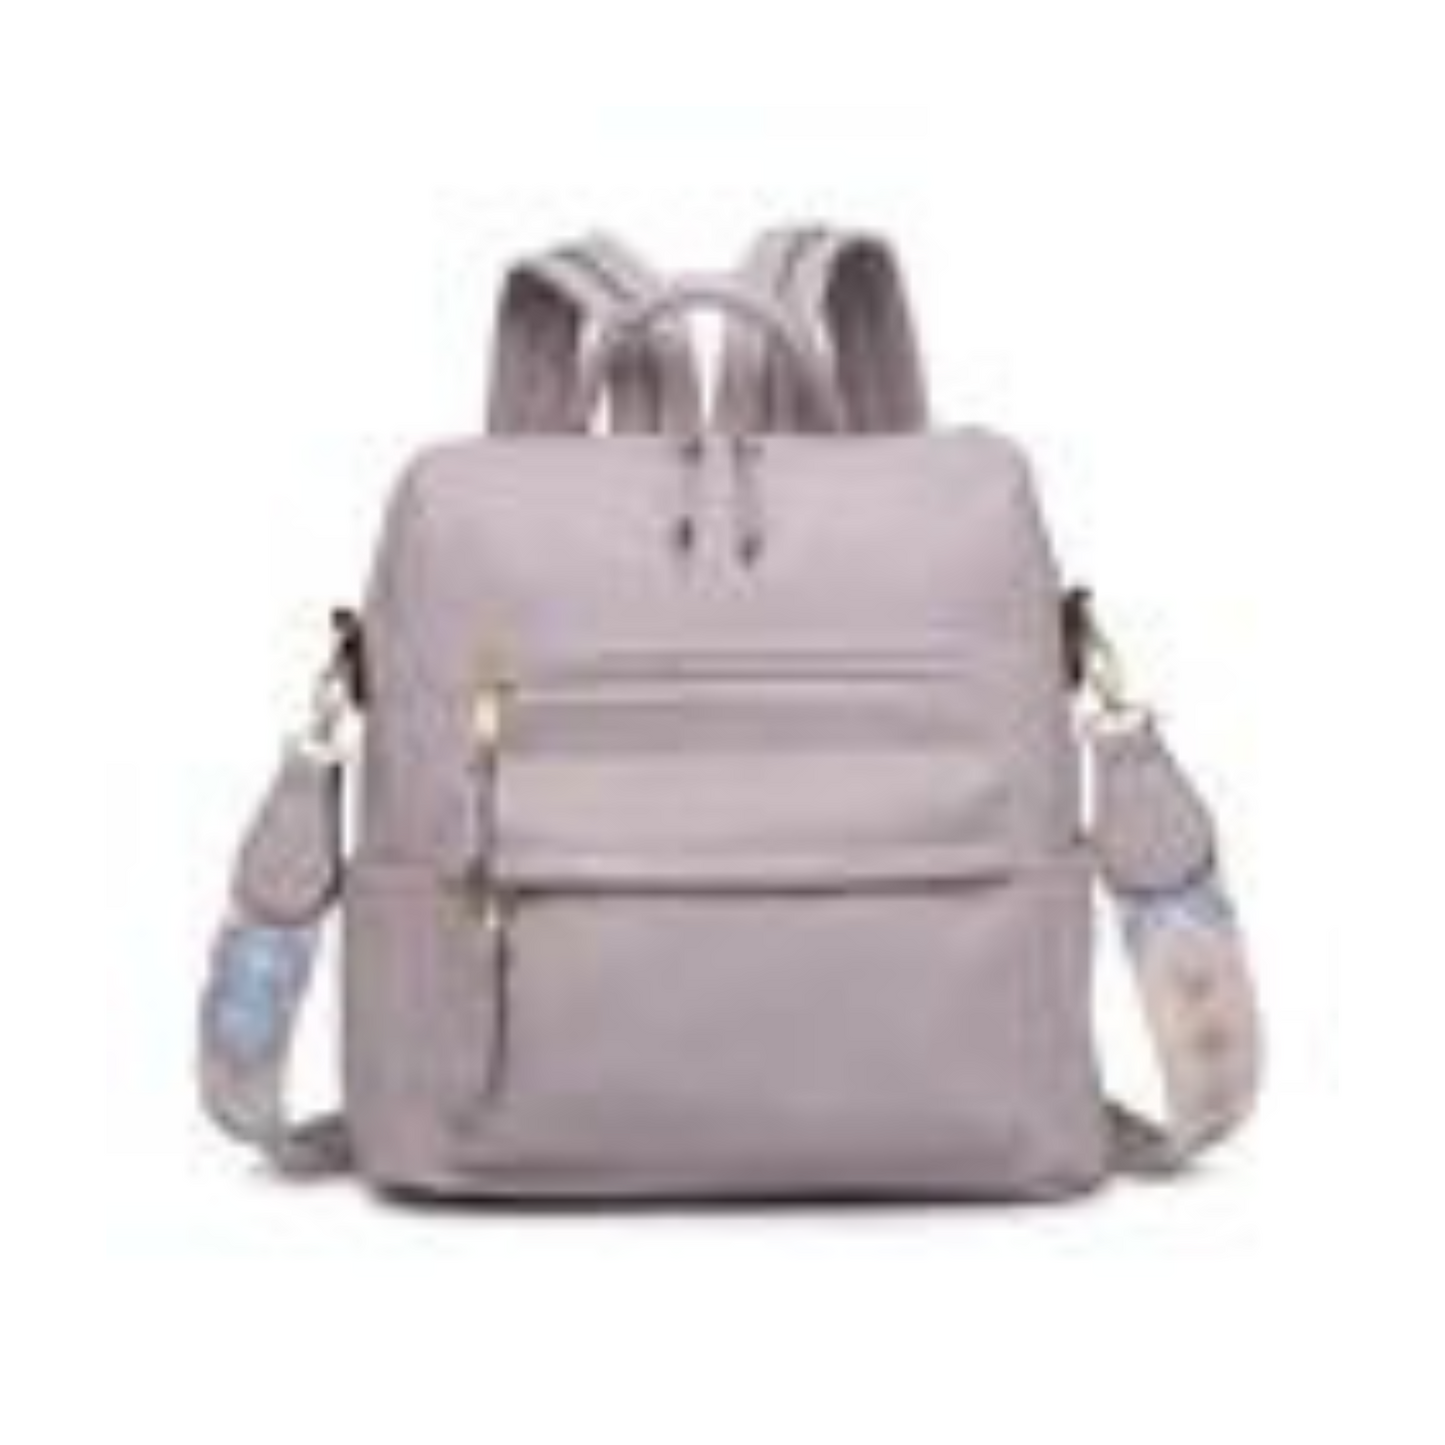 This Convertible Backpack with Guitar Strap has both style and function with its dusty blue and dusty lavender colors. Whether you need a sturdy backpack or versatile guitar strap, this convertible item is perfect for both purposes. Be ready for any adventure with this convenient and stylish carry-all.